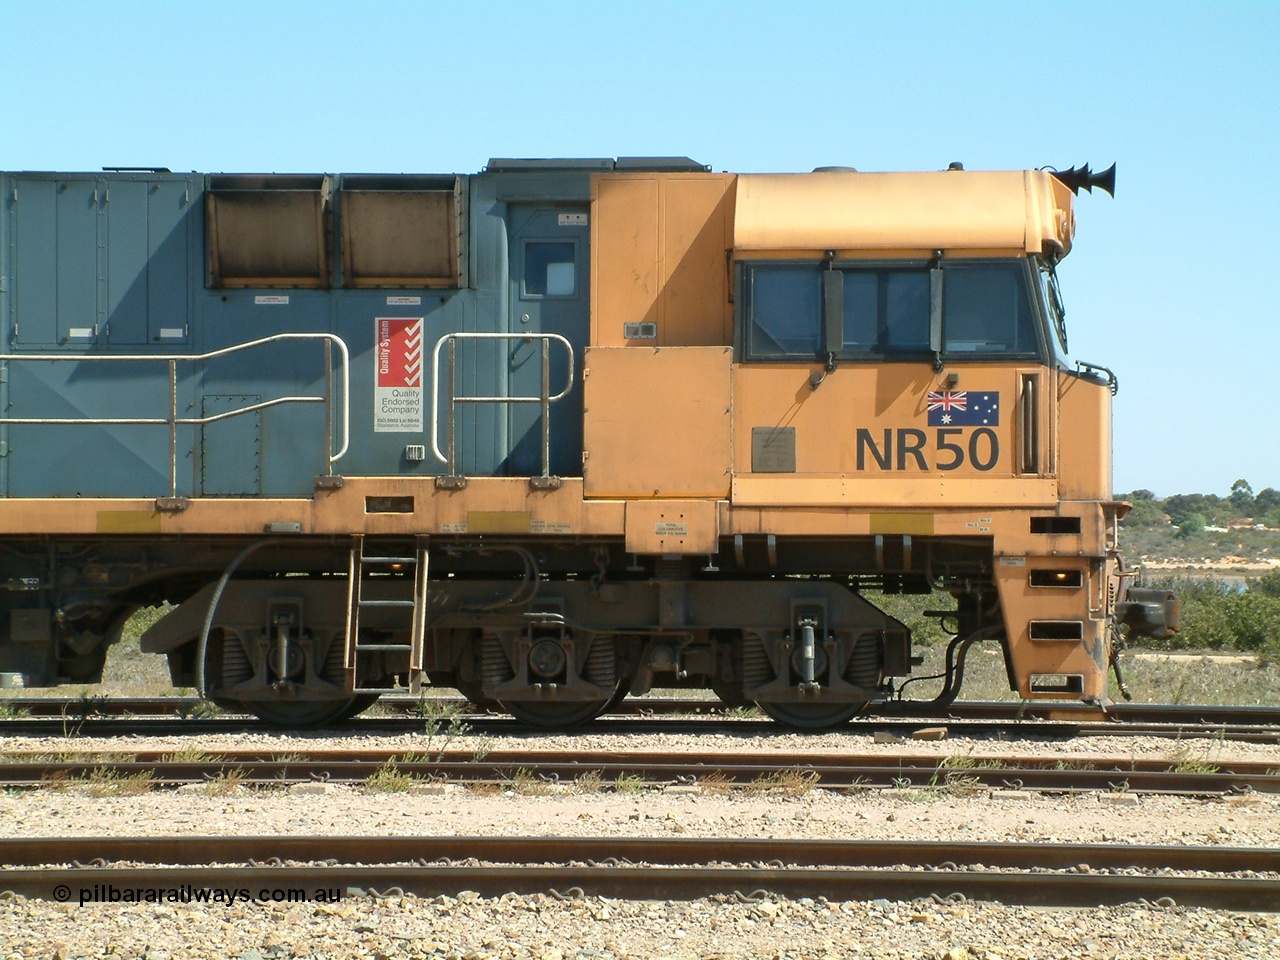 030404 125337
Port Augusta Spencer Junction yard, a Perth bound intermodal awaits departure time on 13 Road behind National Rail NR class units built by Goninan as GE Cv40-9i models, NR 50 serial 7250-08 / 97-252. 4th April 2003.
Keywords: NR-class;NR50;7250-08/97-252;Goninan;GE;Cv40-9i;